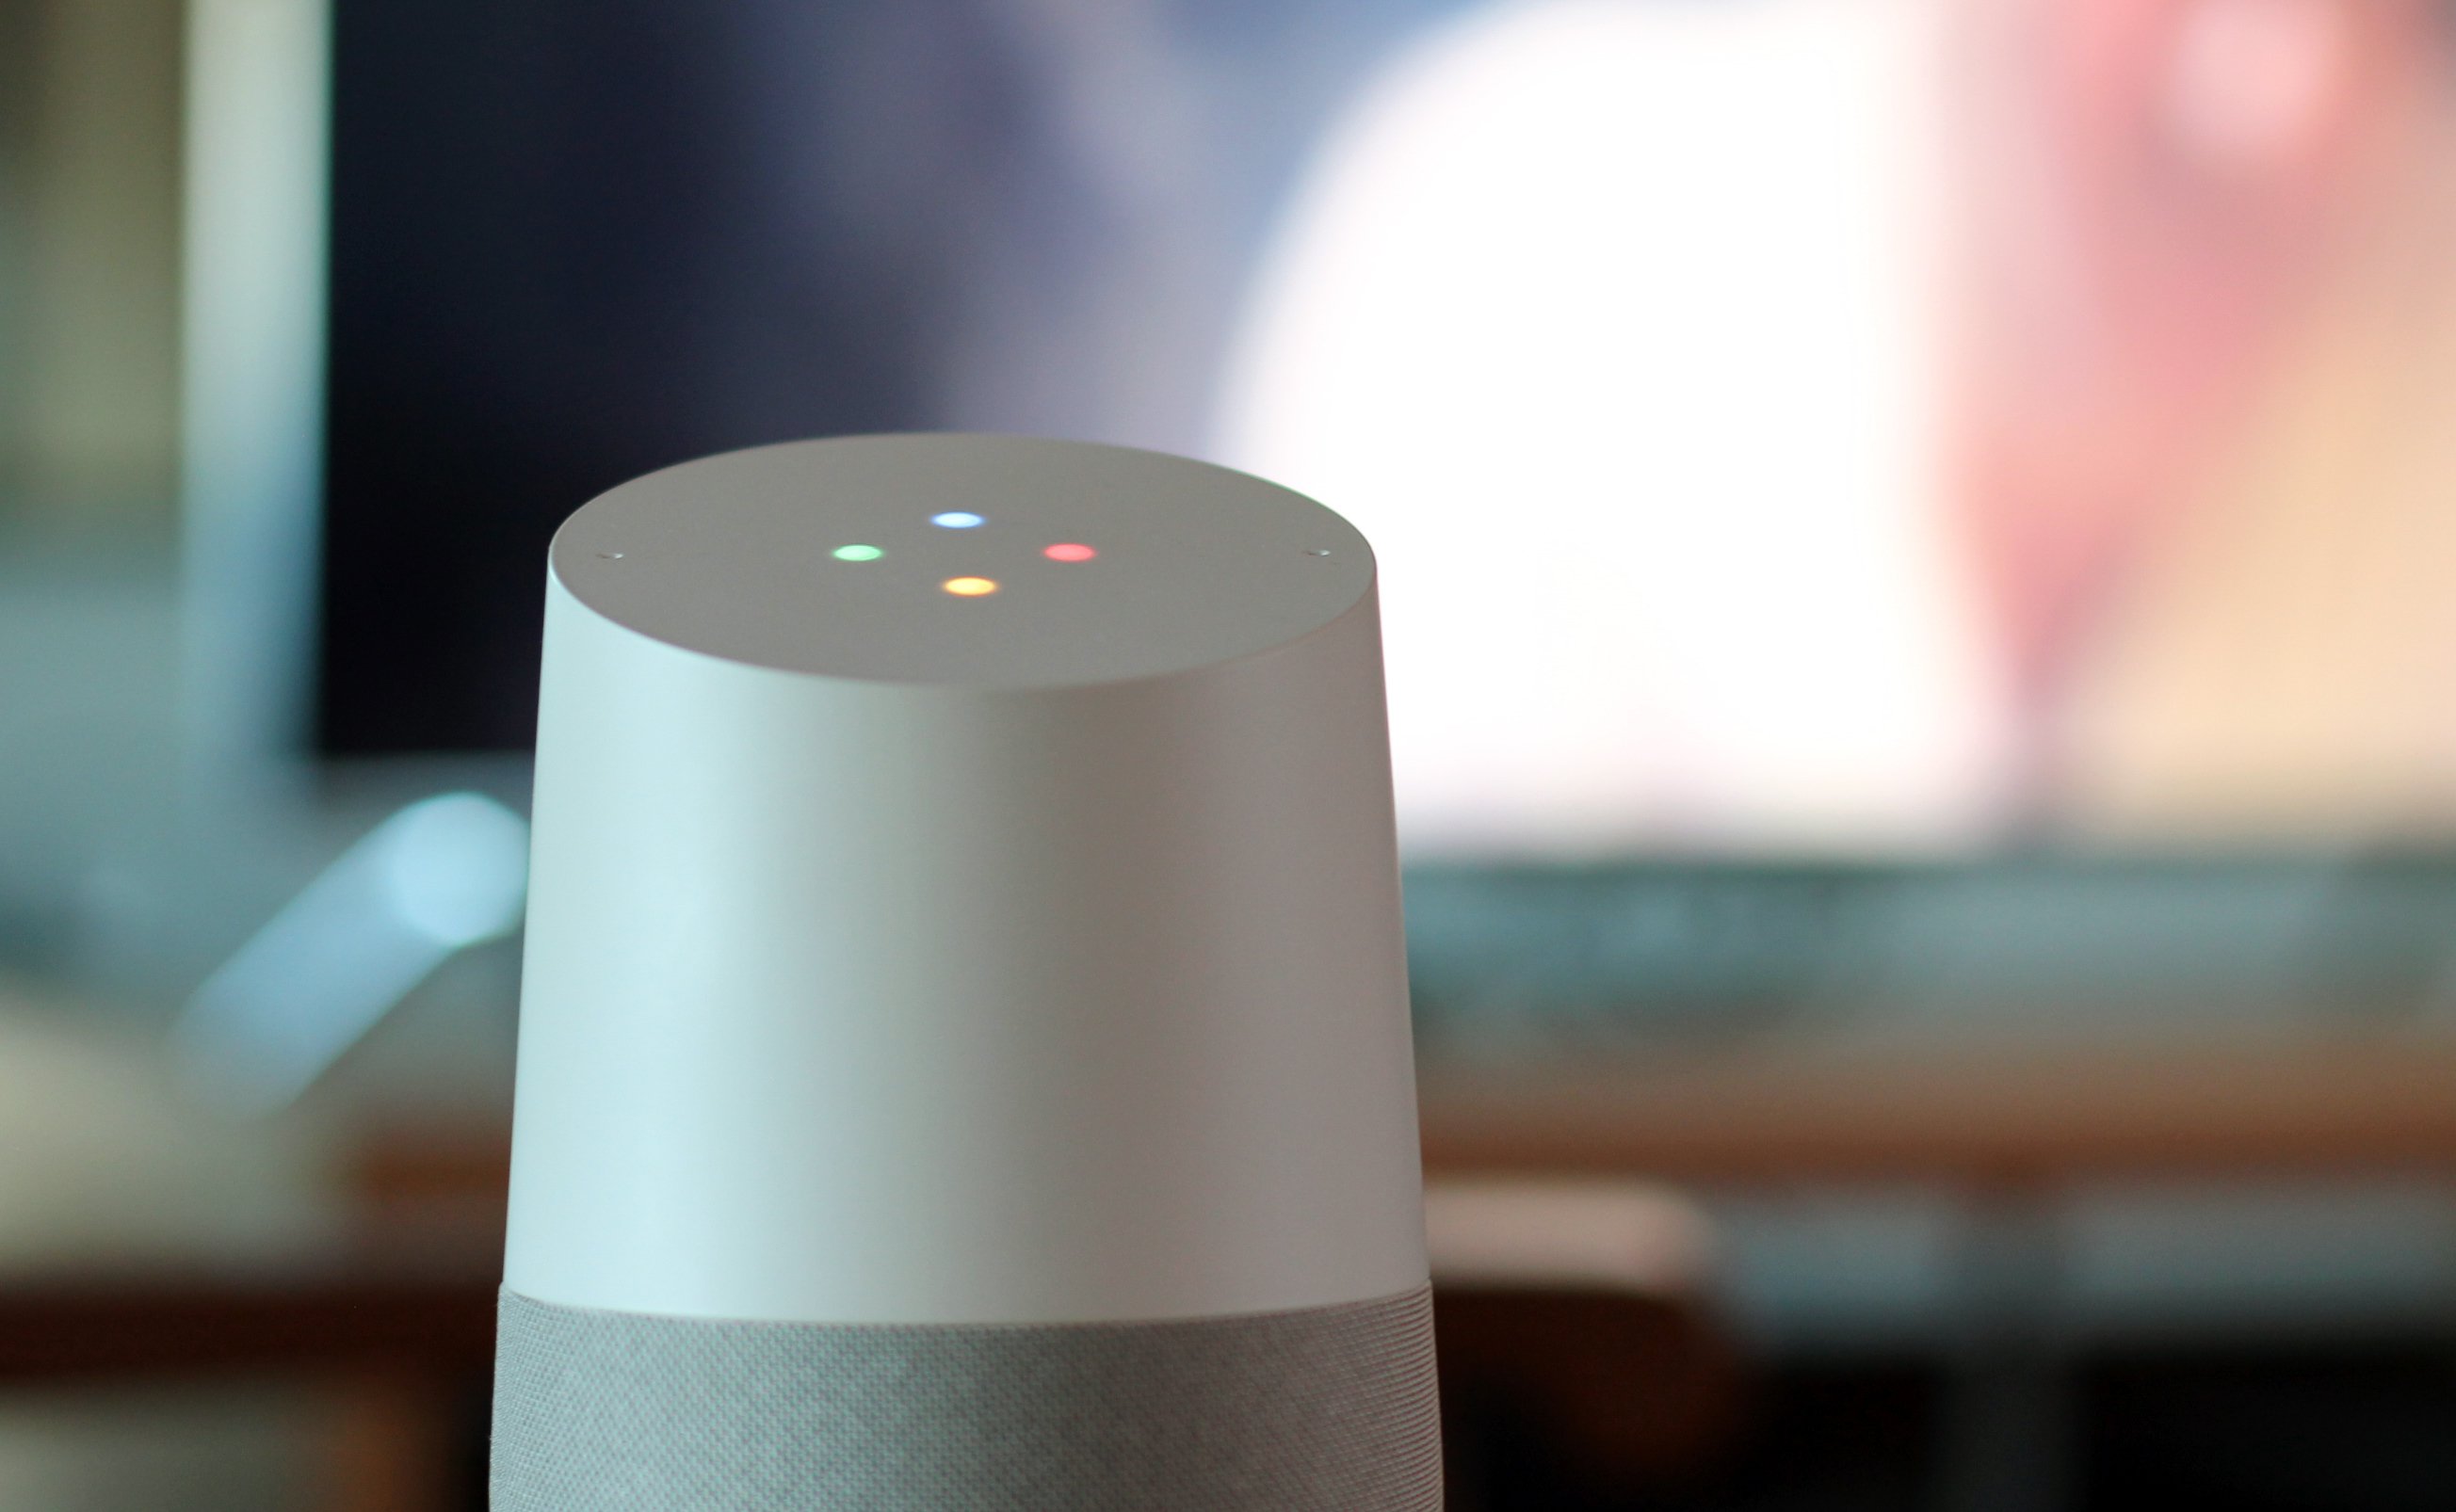 Google Home 4 On The Nose, Google Now Accused Of Fostering Illegal Activities